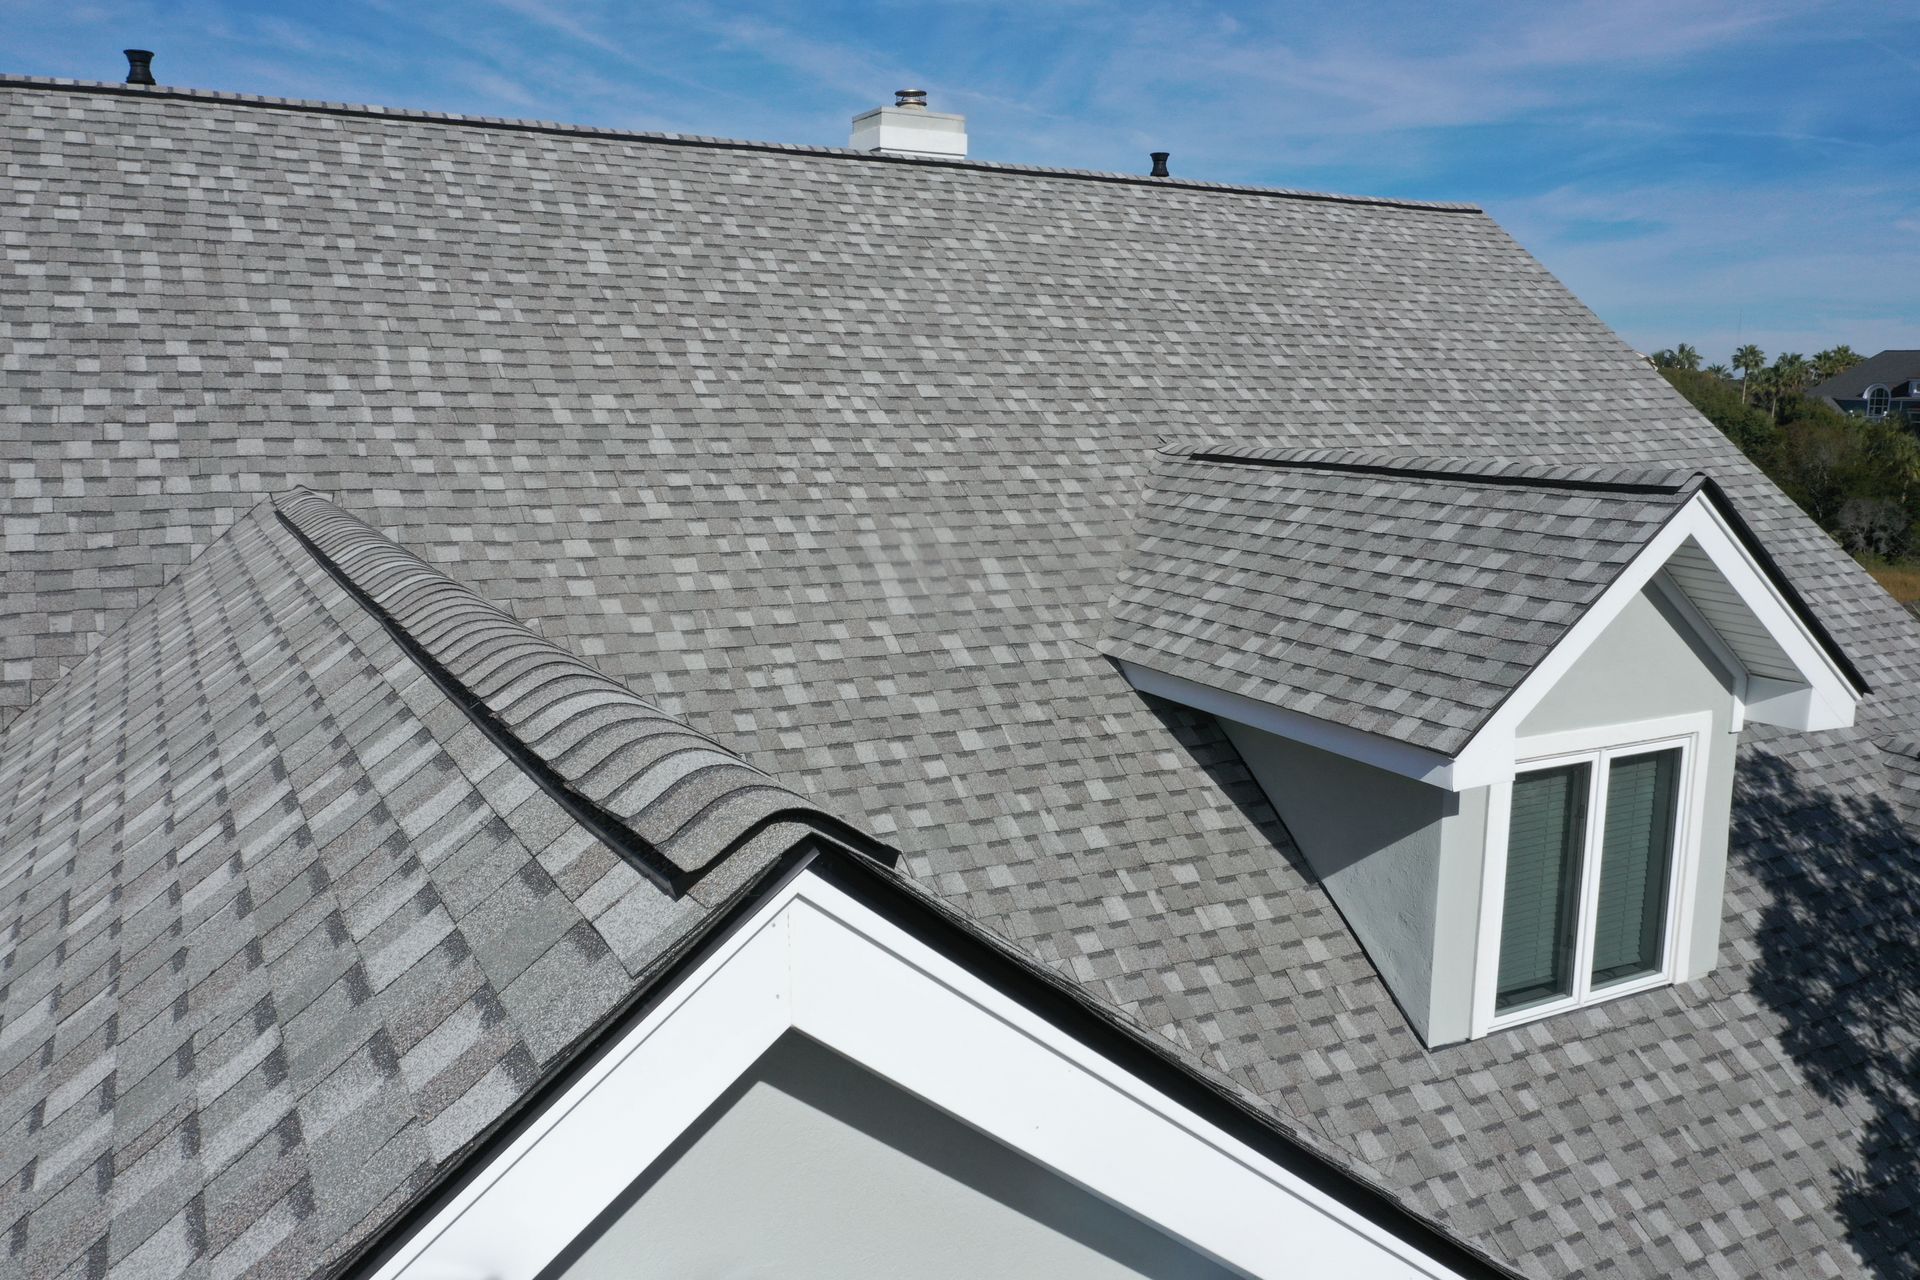 nice roof after residential roof installation service from professional contractors